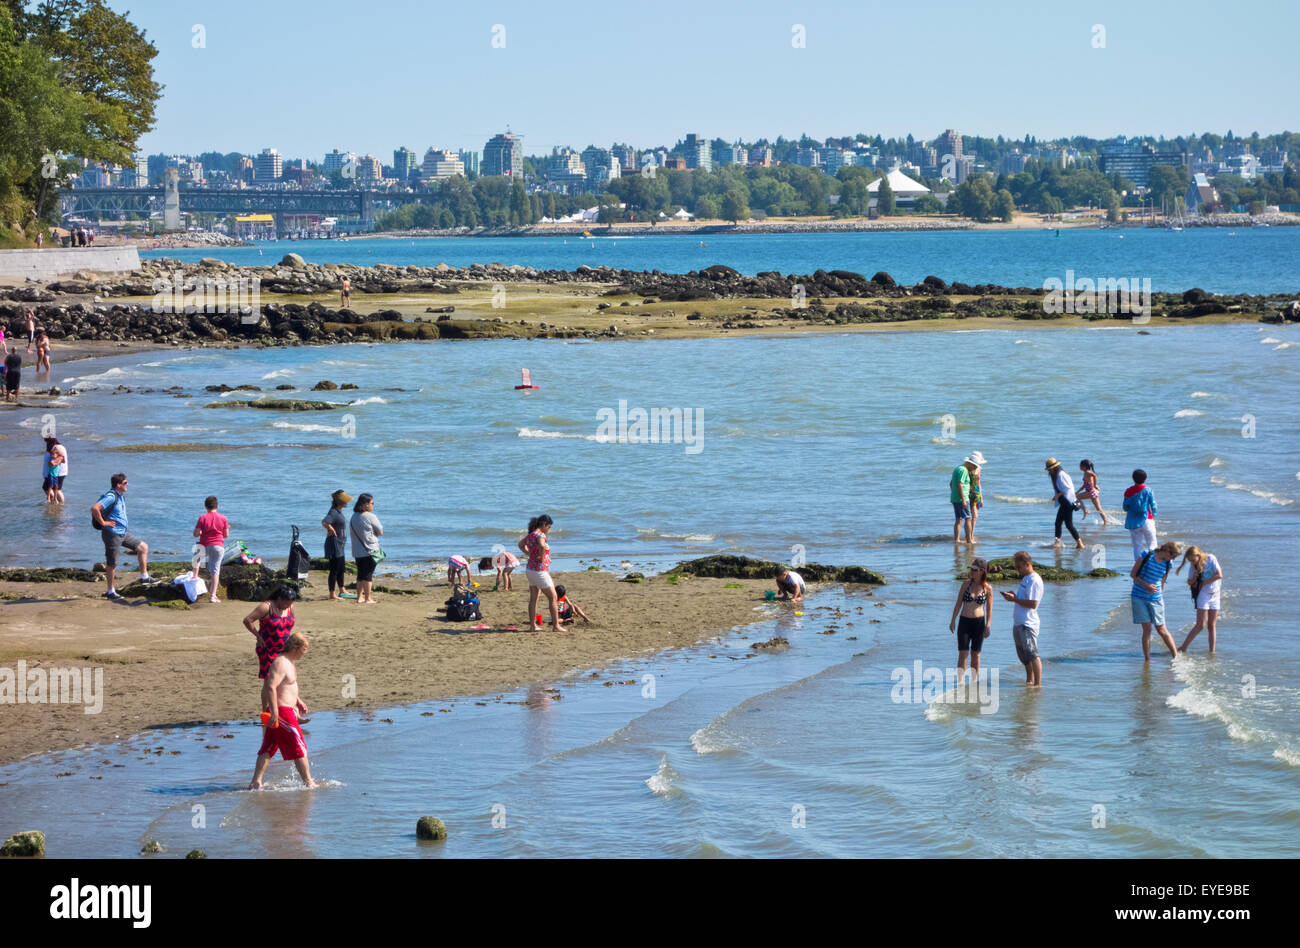 People enjoying the waters of English Bay at Second Beach in Stanley Park in Vancouver.  Swimming, sunbathing summer fun, cooling off. Stock Photo